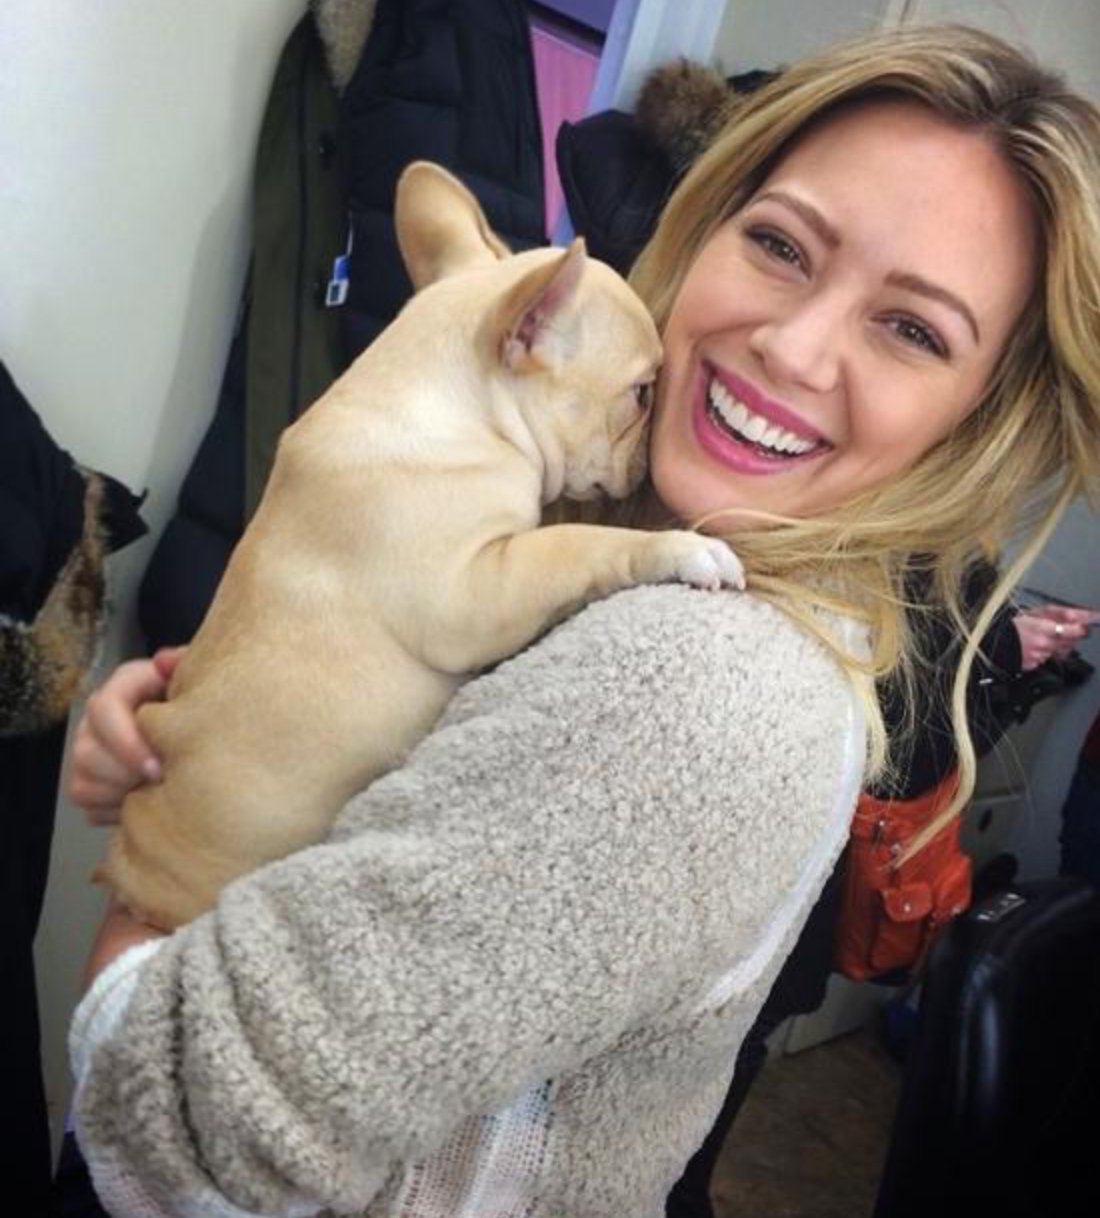 Hilary Duff carrying her French Bulldog while smiling